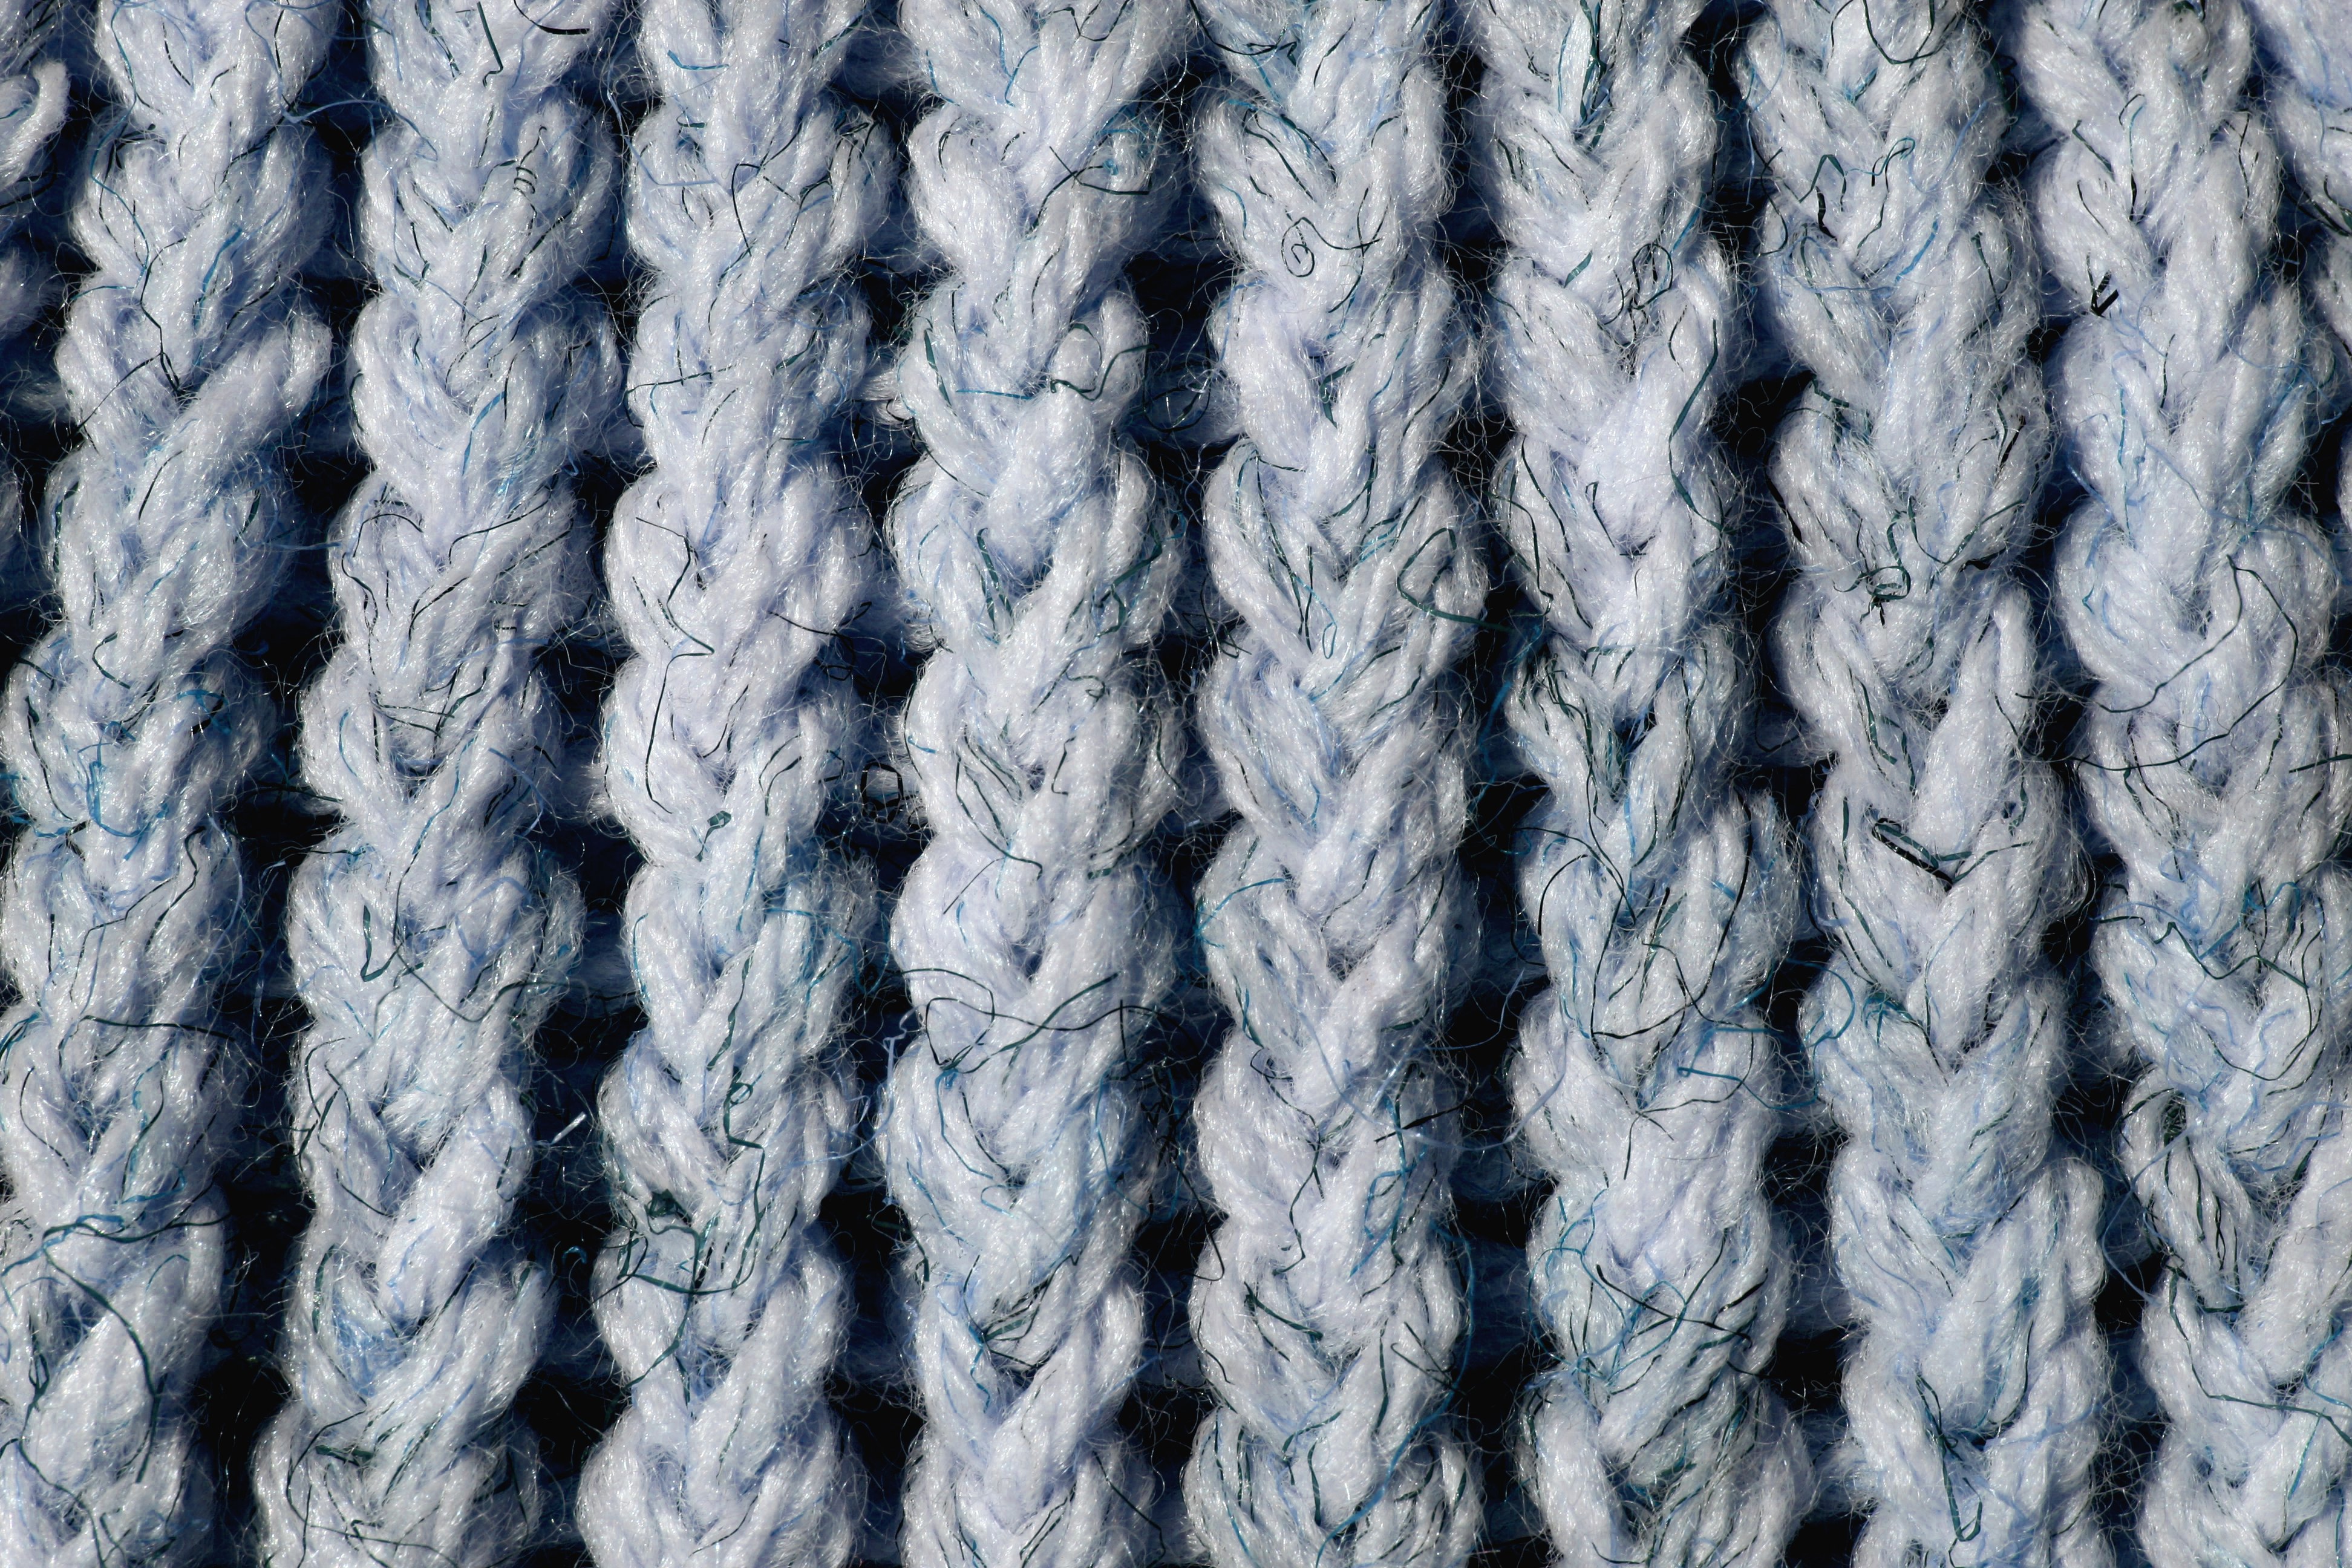 Light Blue Knit Yarn Close Up Texture Picture Free Photograph Images, Photos, Reviews